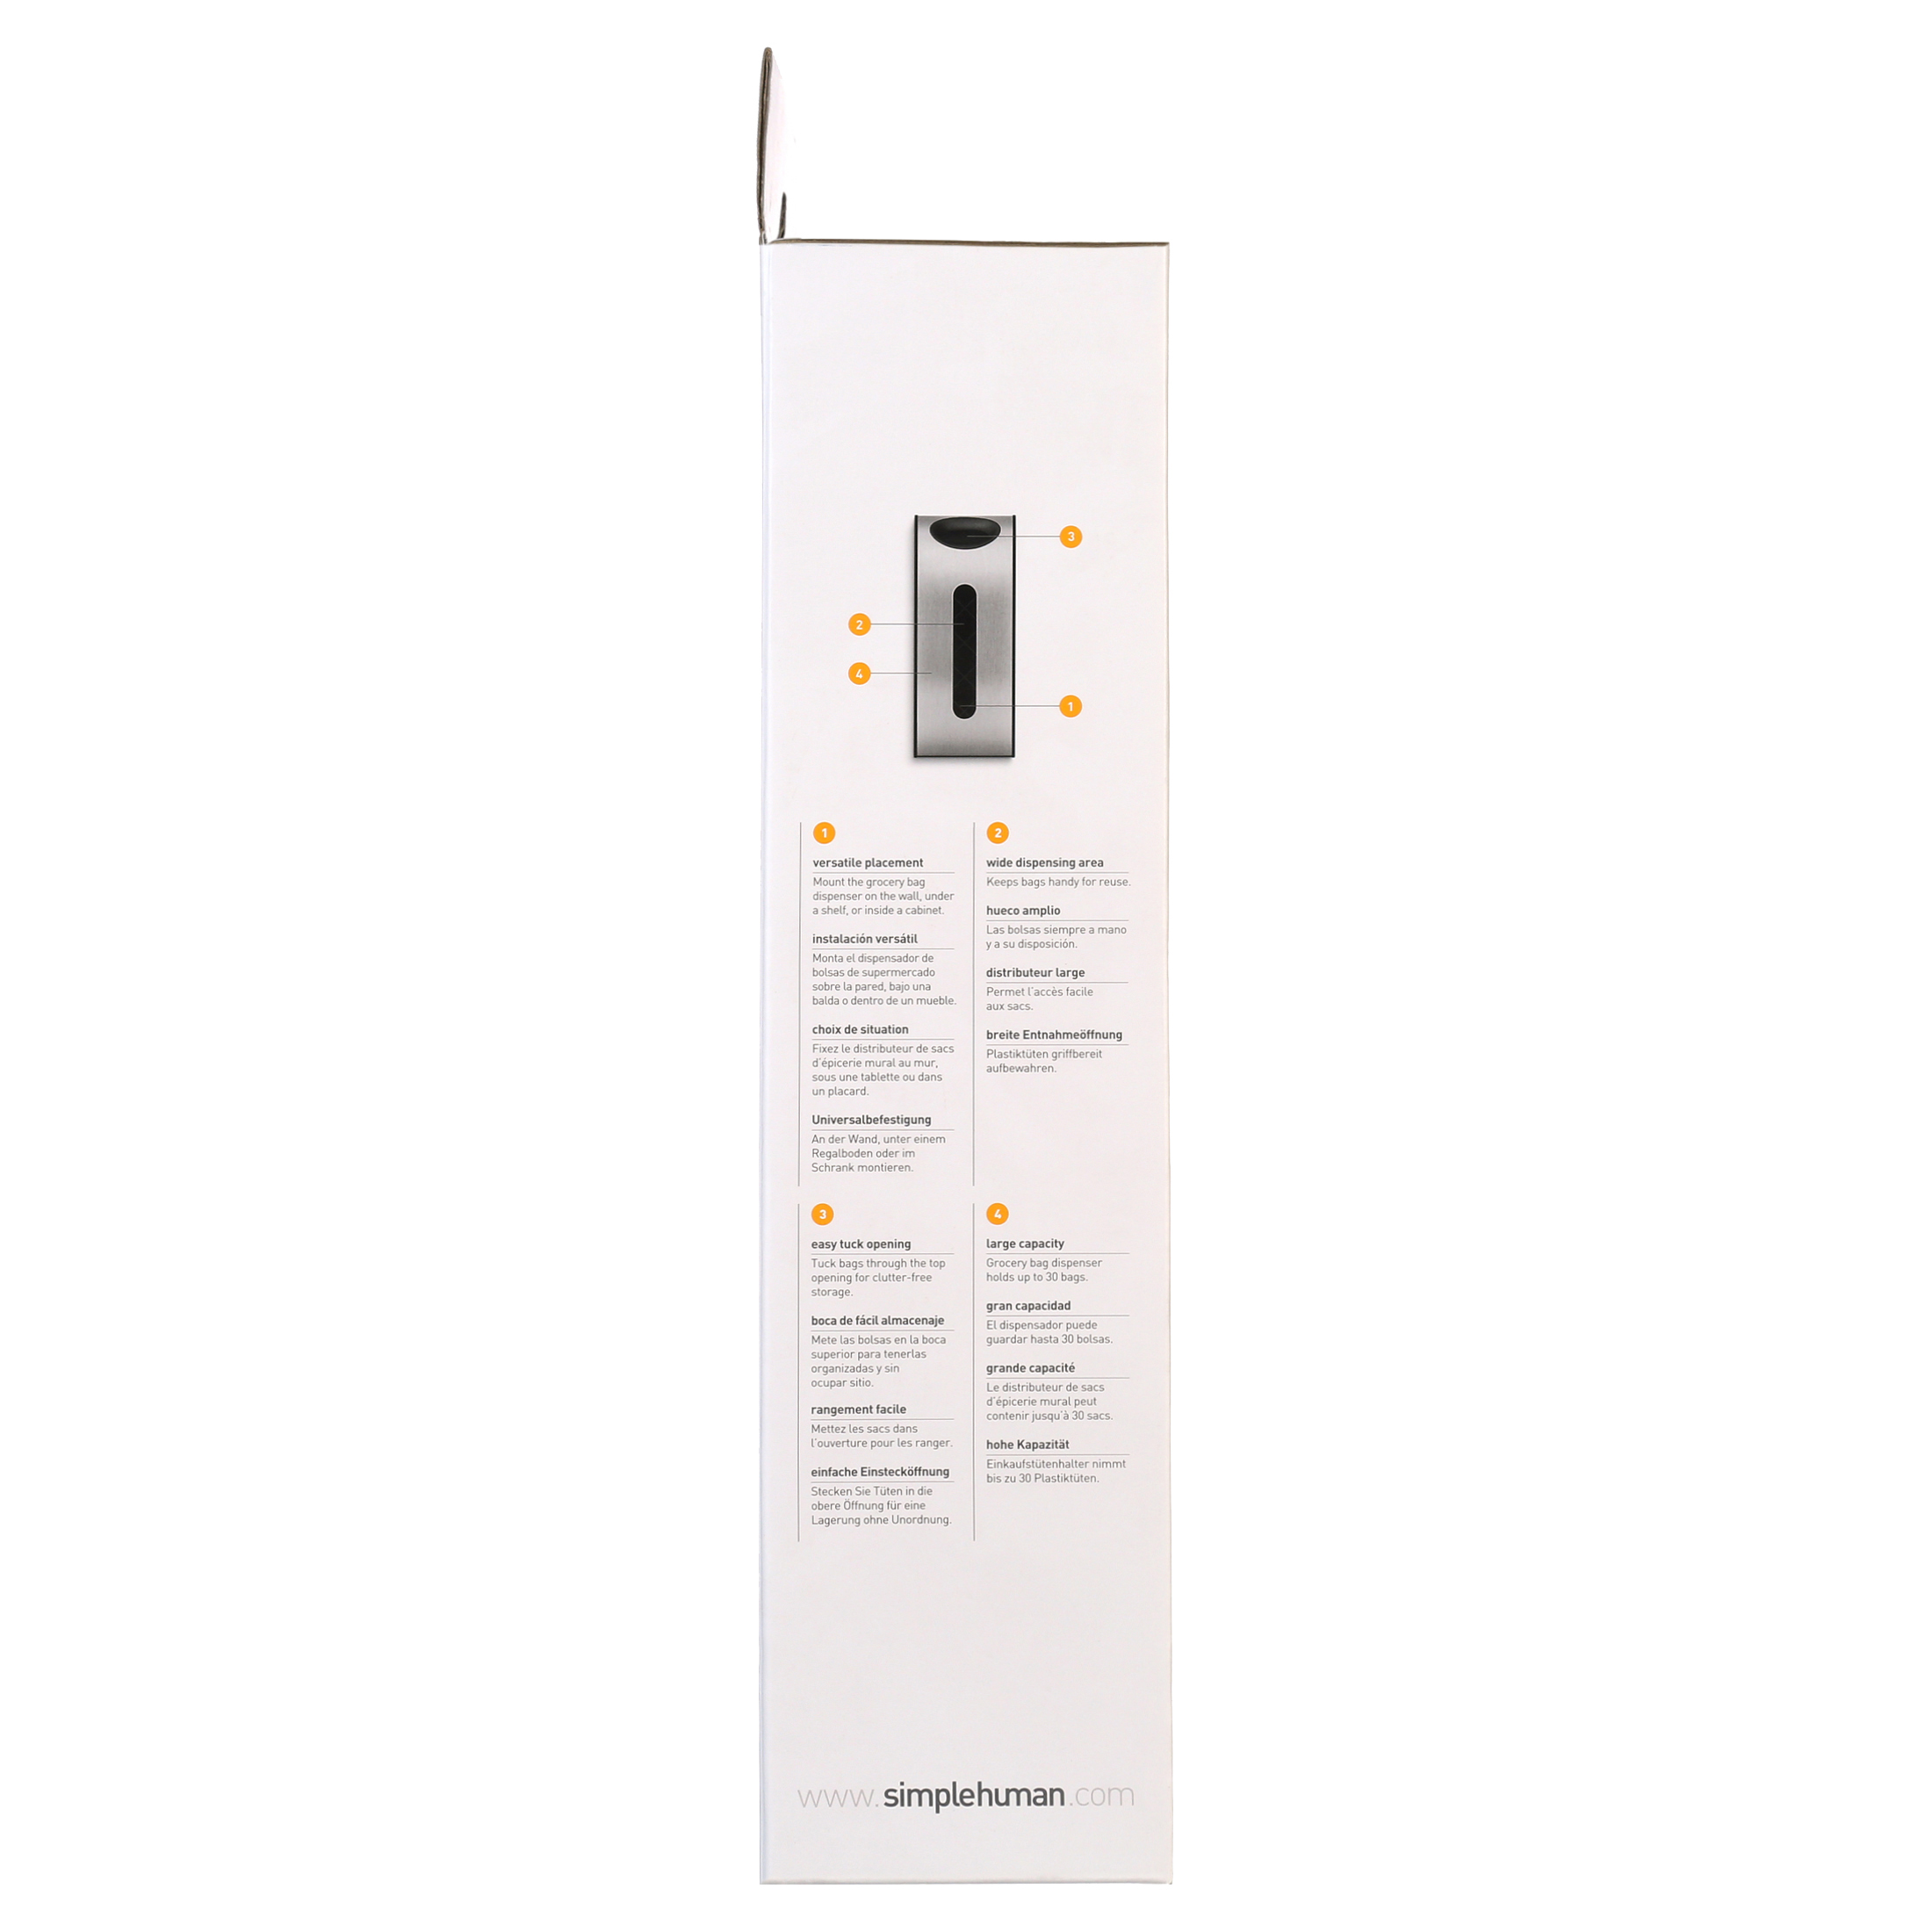 simplehuman Wall Mount Grocery Bag Dispenser, Brushed Stainless Steel - image 3 of 11